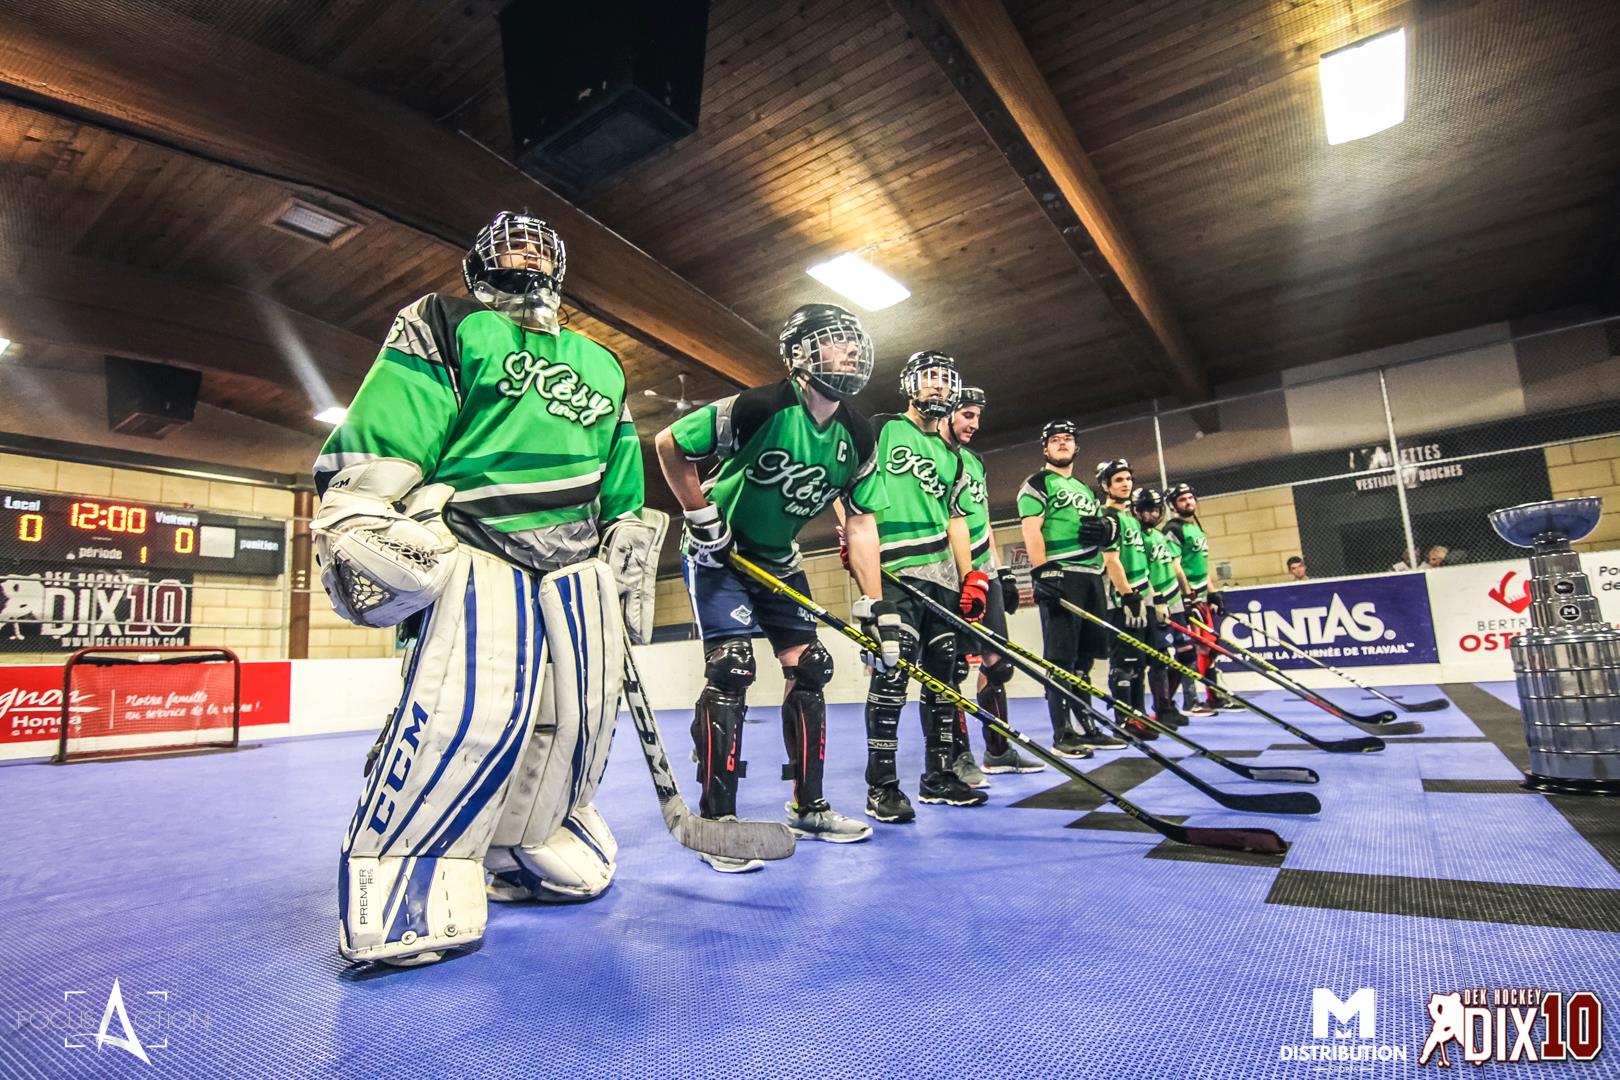 To improve the  Dekhockey  experience, centers throughout Quebec are adding Nevco scoreboards to their facilities.